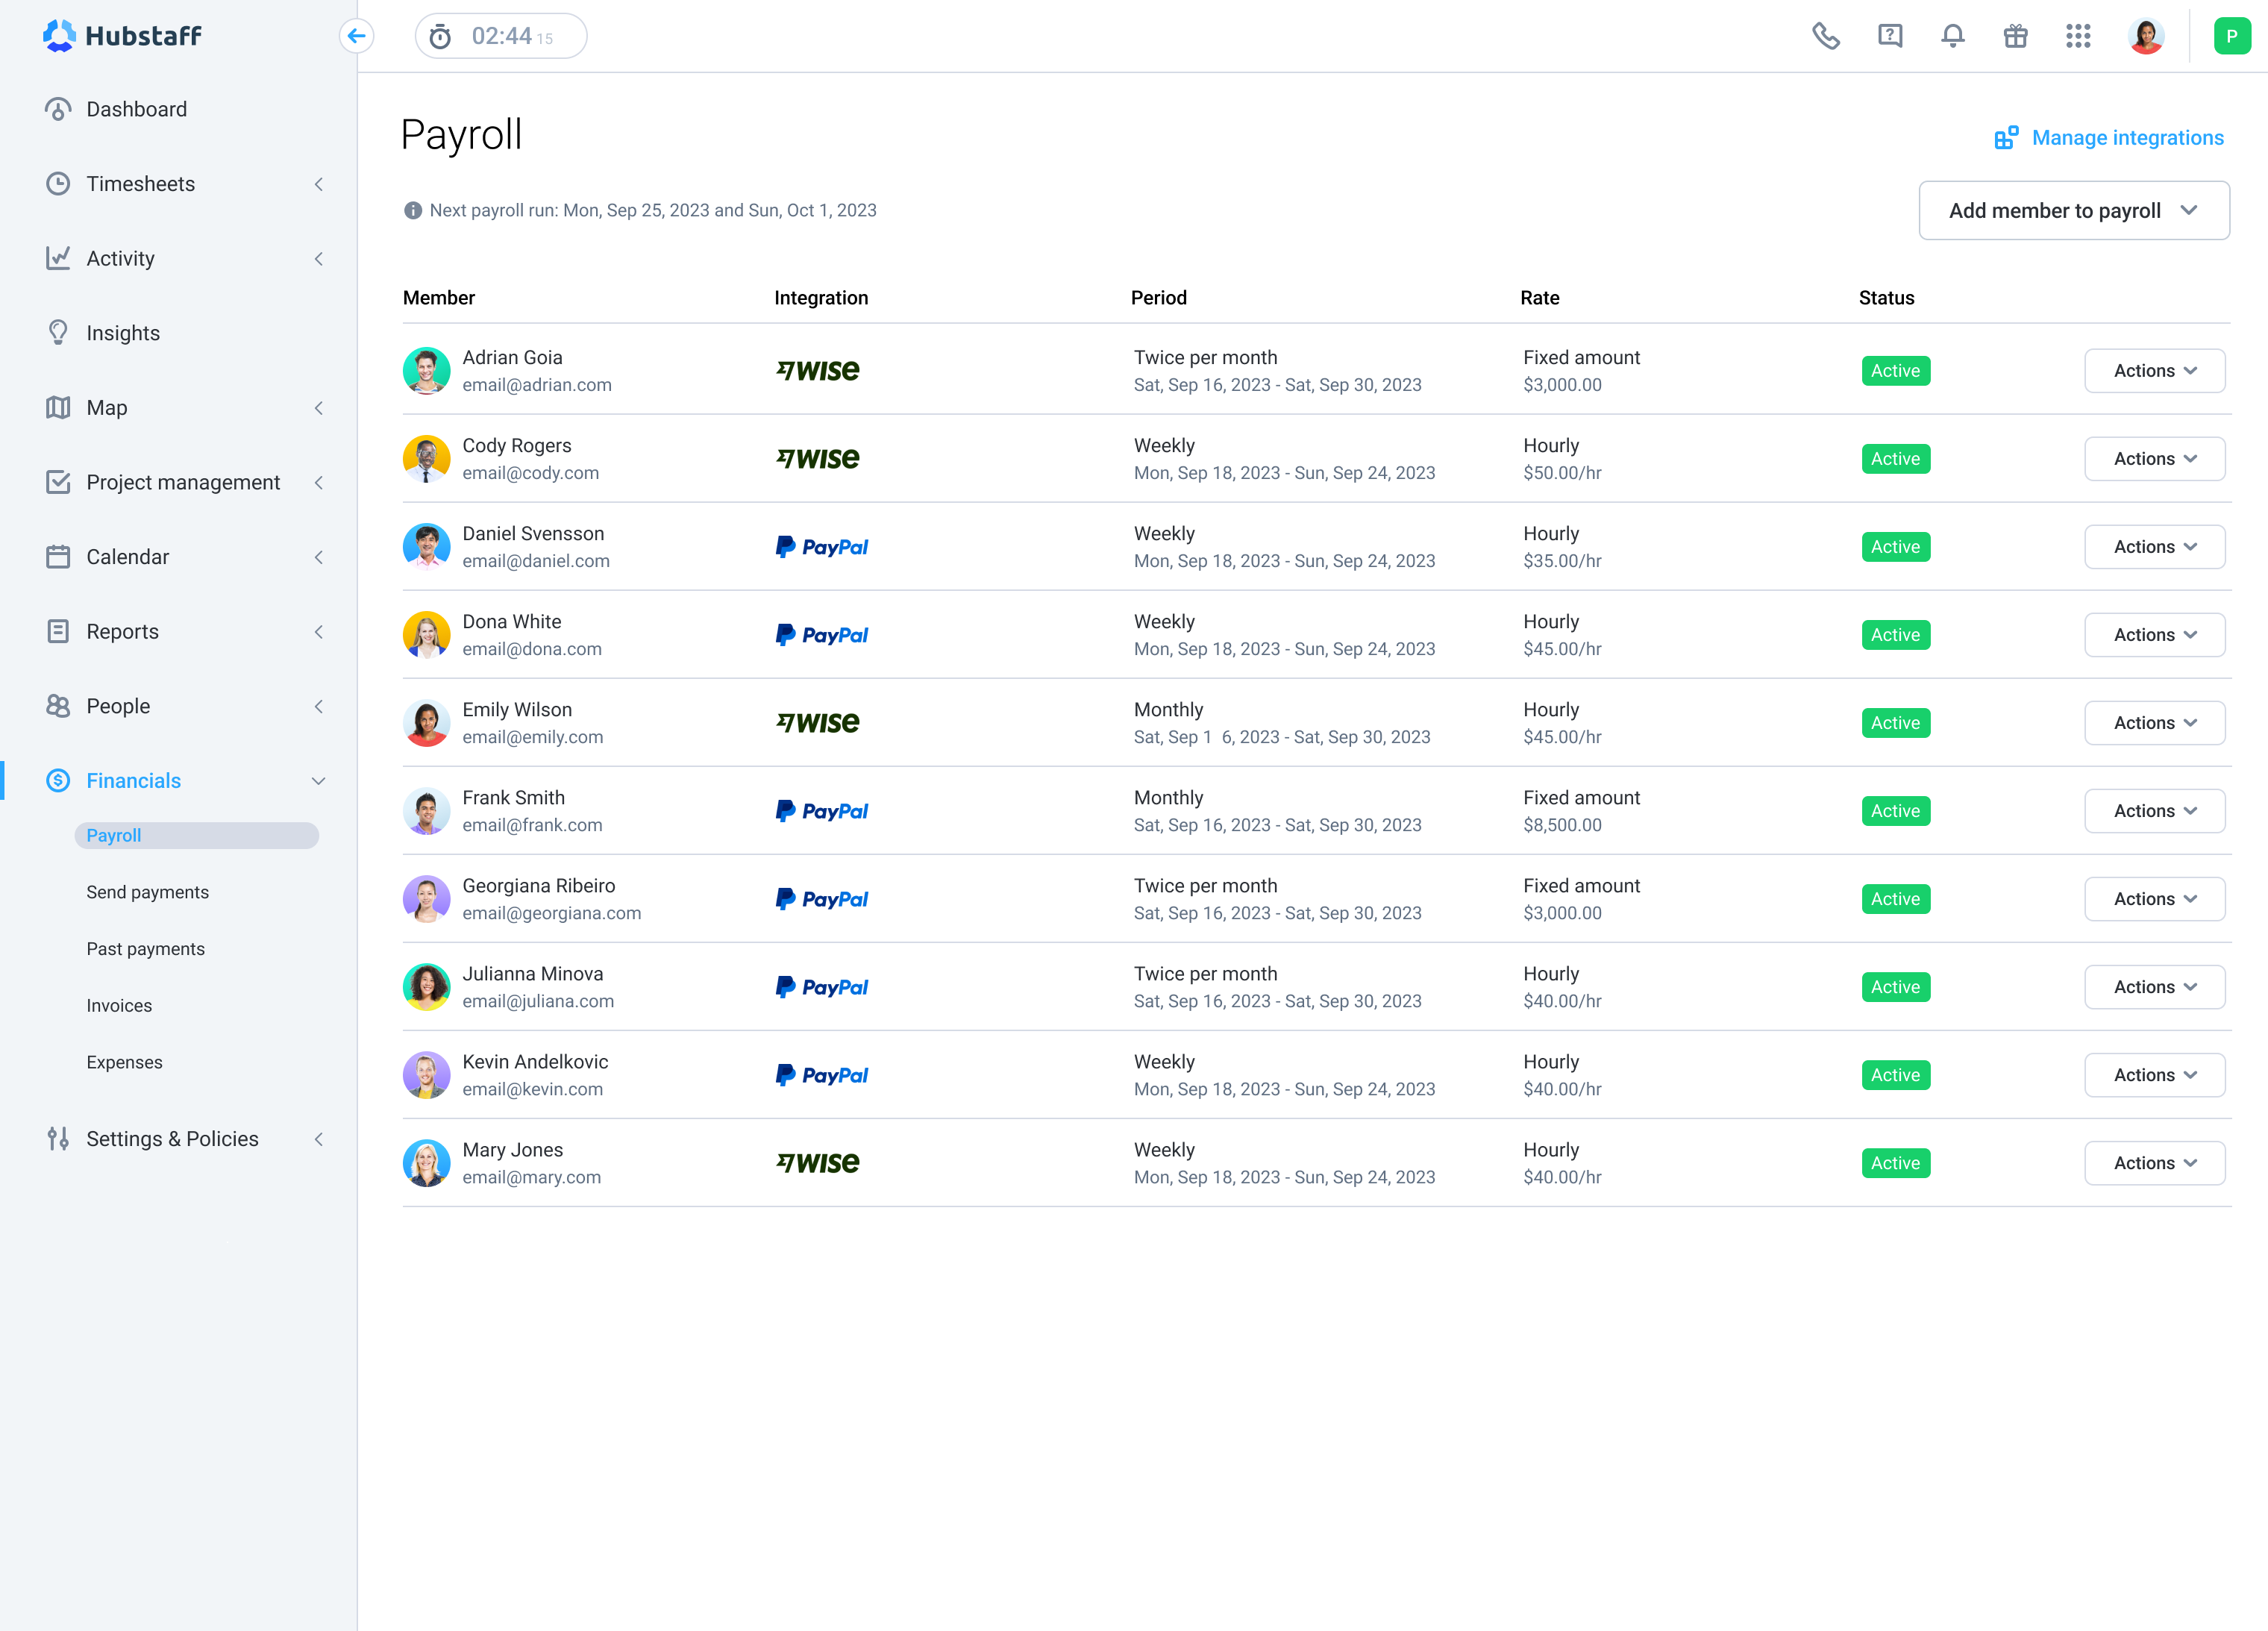 Payroll: Pay your team on time and accurately with automated tools and support for PayPal, Wise, and more.